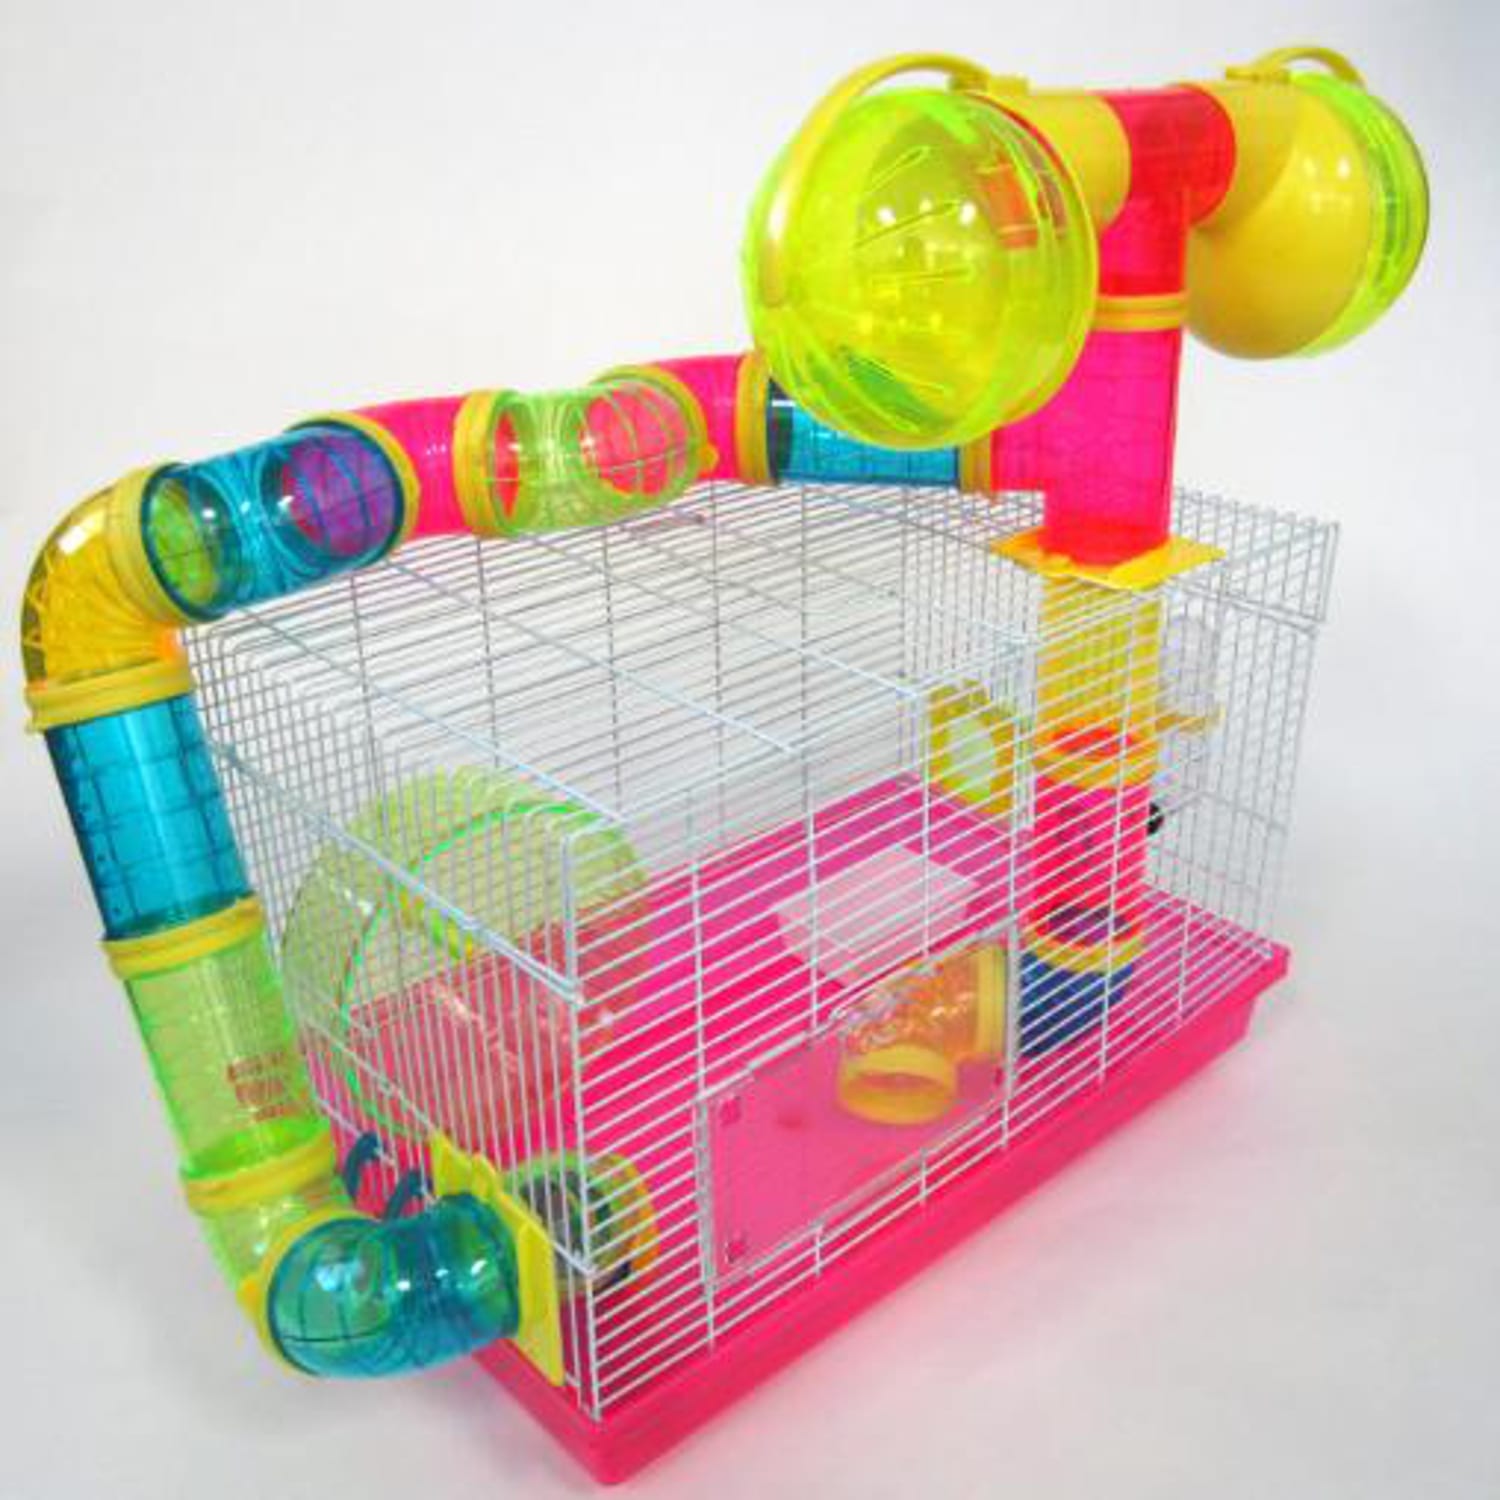 YML Tubed Hamster Cage in Pink